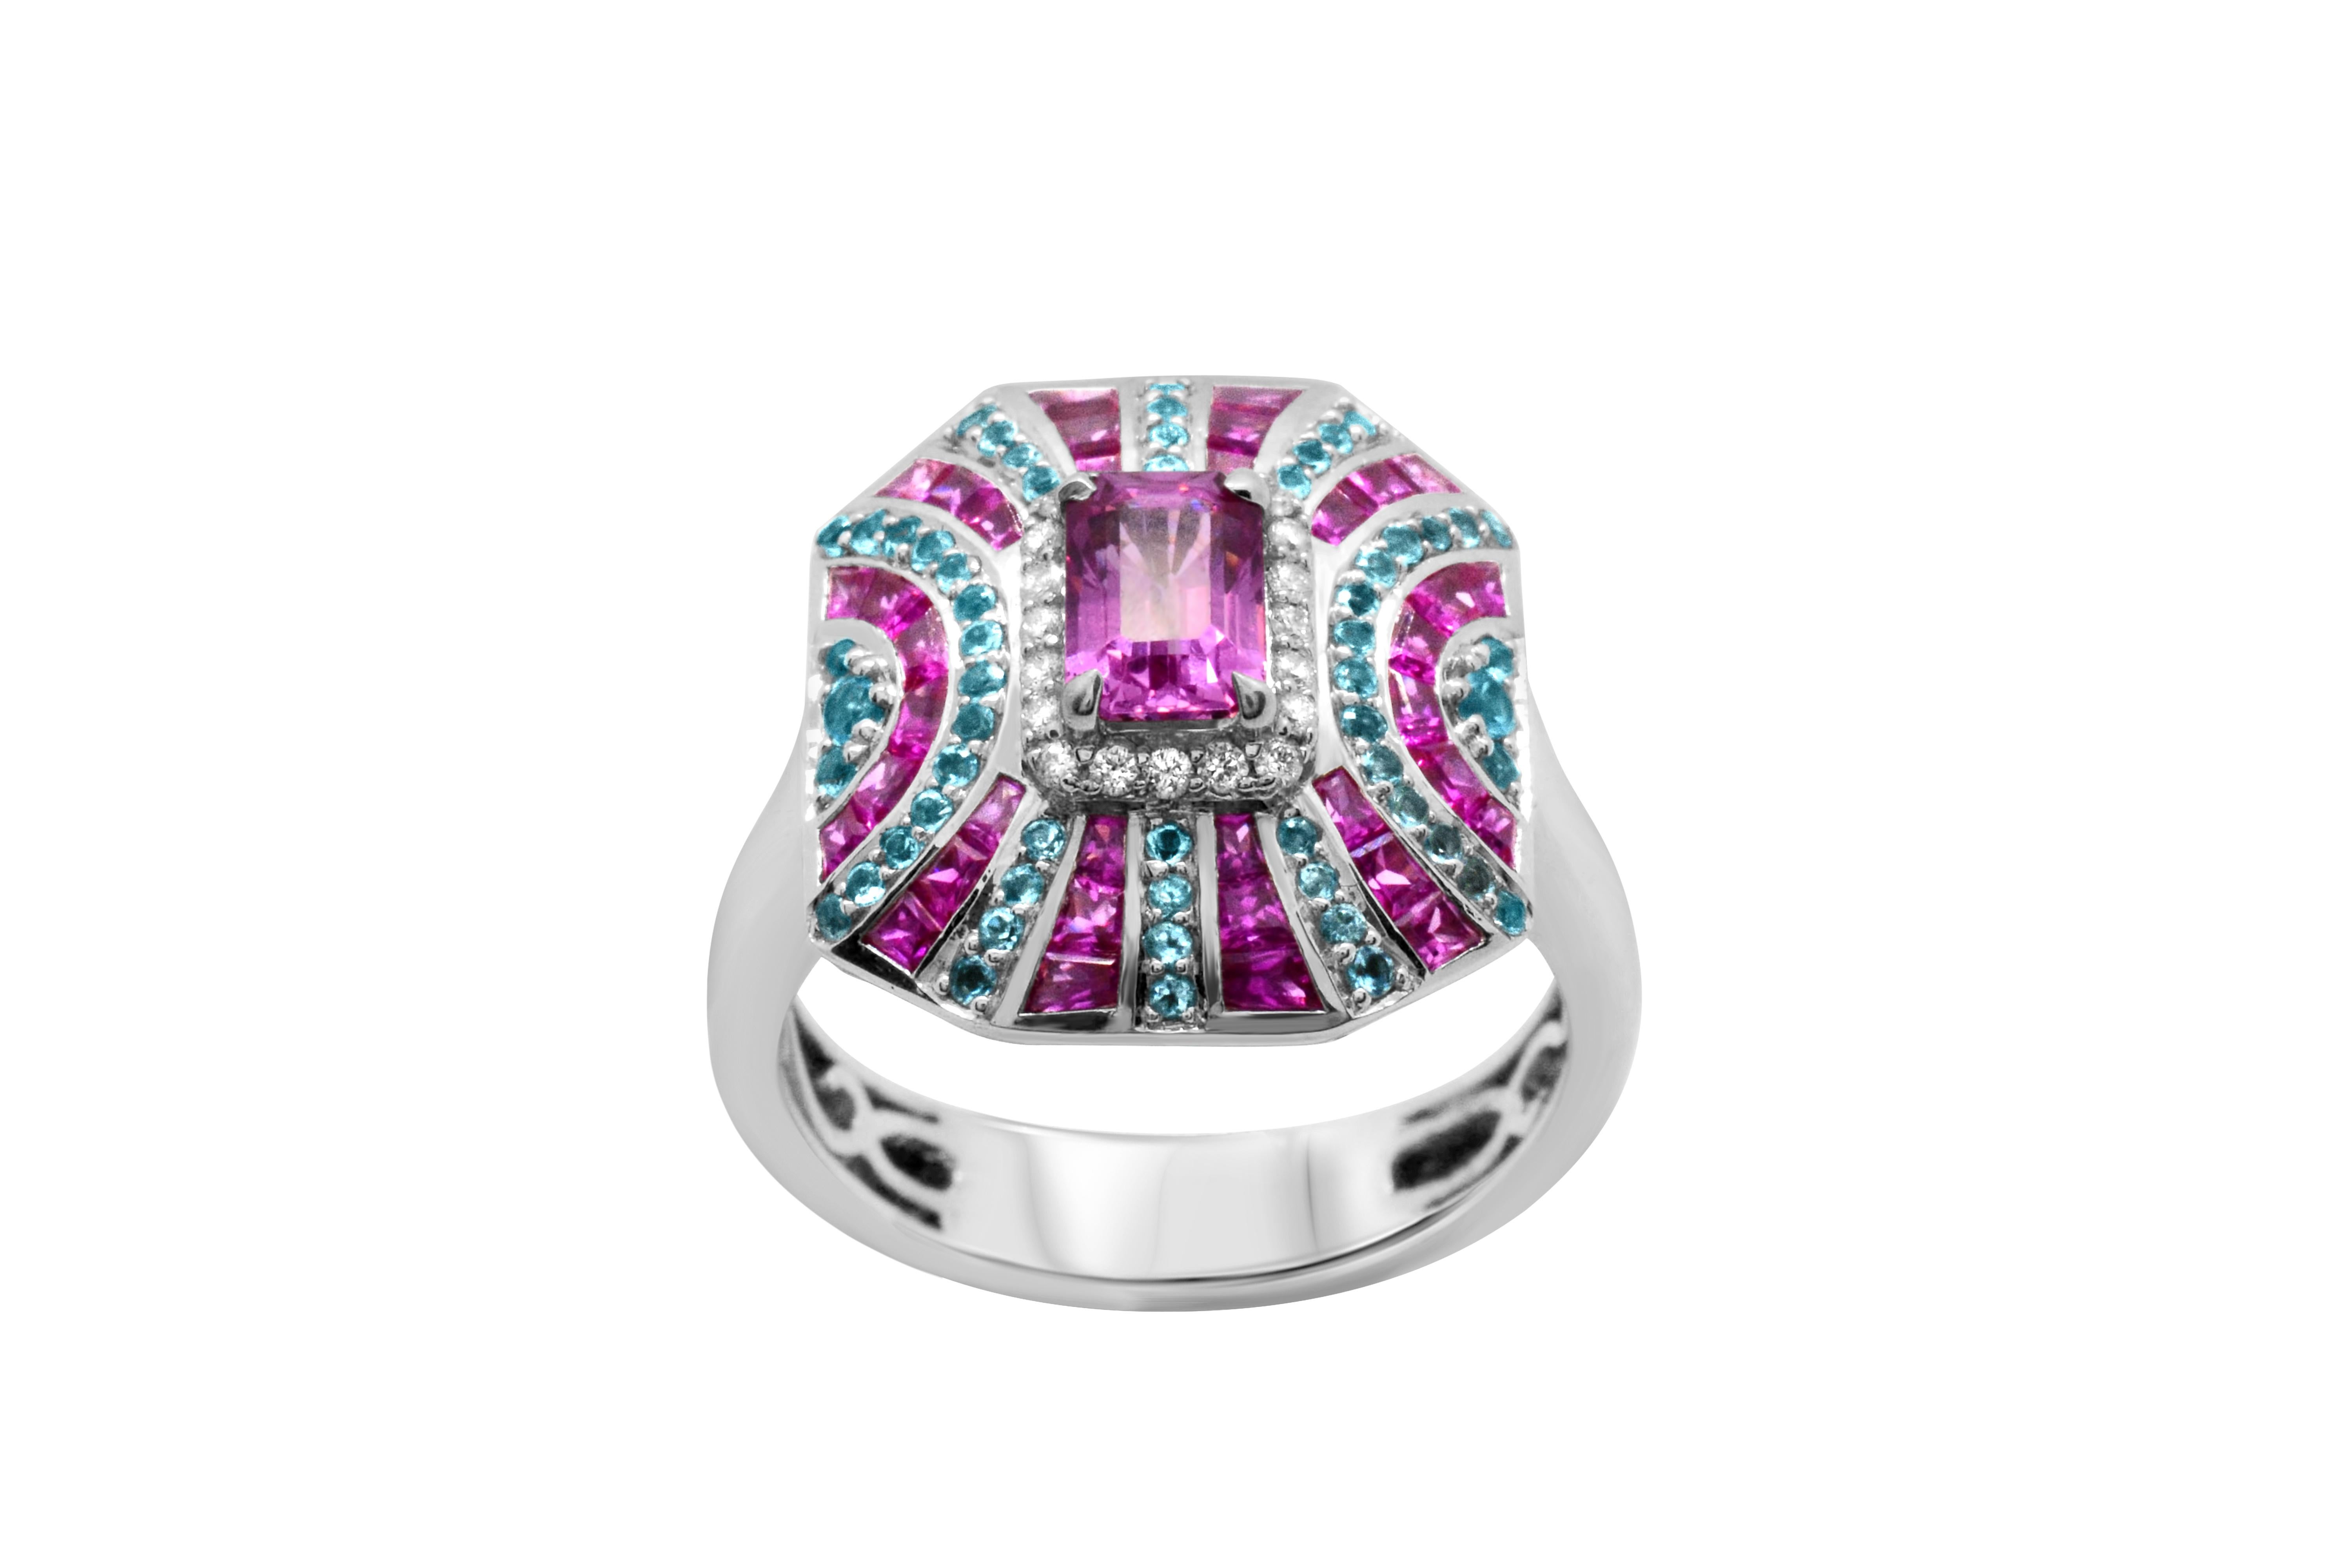 An art-deco inspired vivid Pink Sapphire ring.

This geometric design features a 1.61 carat Pink Sapphire that sits at the center.  There are also 1.05 carat baguette Pink Sapphires, 0.92 Princess-cut Pink Sapphires and a total of 58 blue topaz